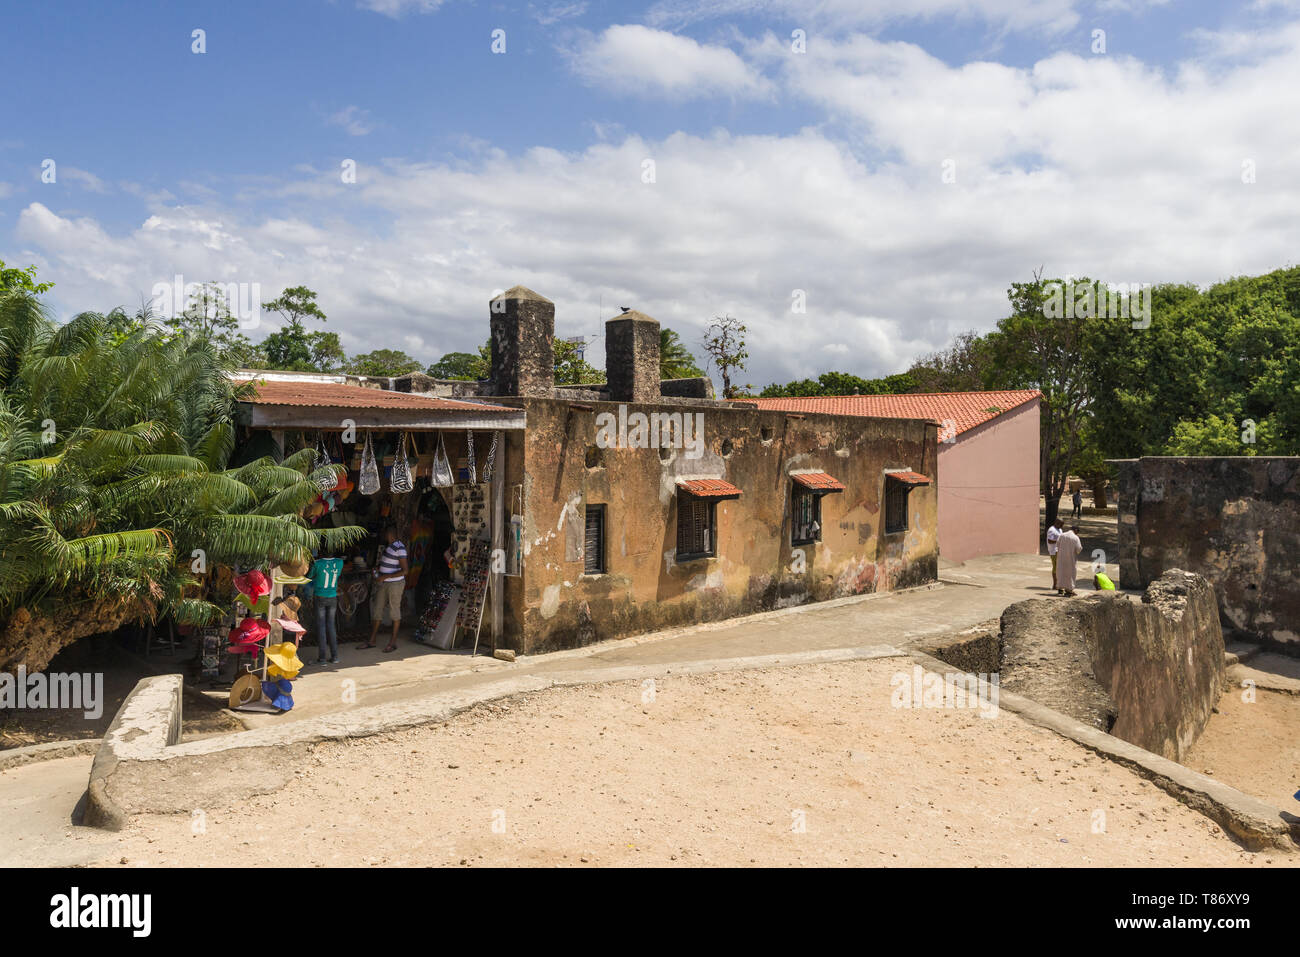 Exterior of the Fort Jesus gift shop, a 16th century Portuguese coastal fort, now a museum, Mombasa, Kenya Stock Photo